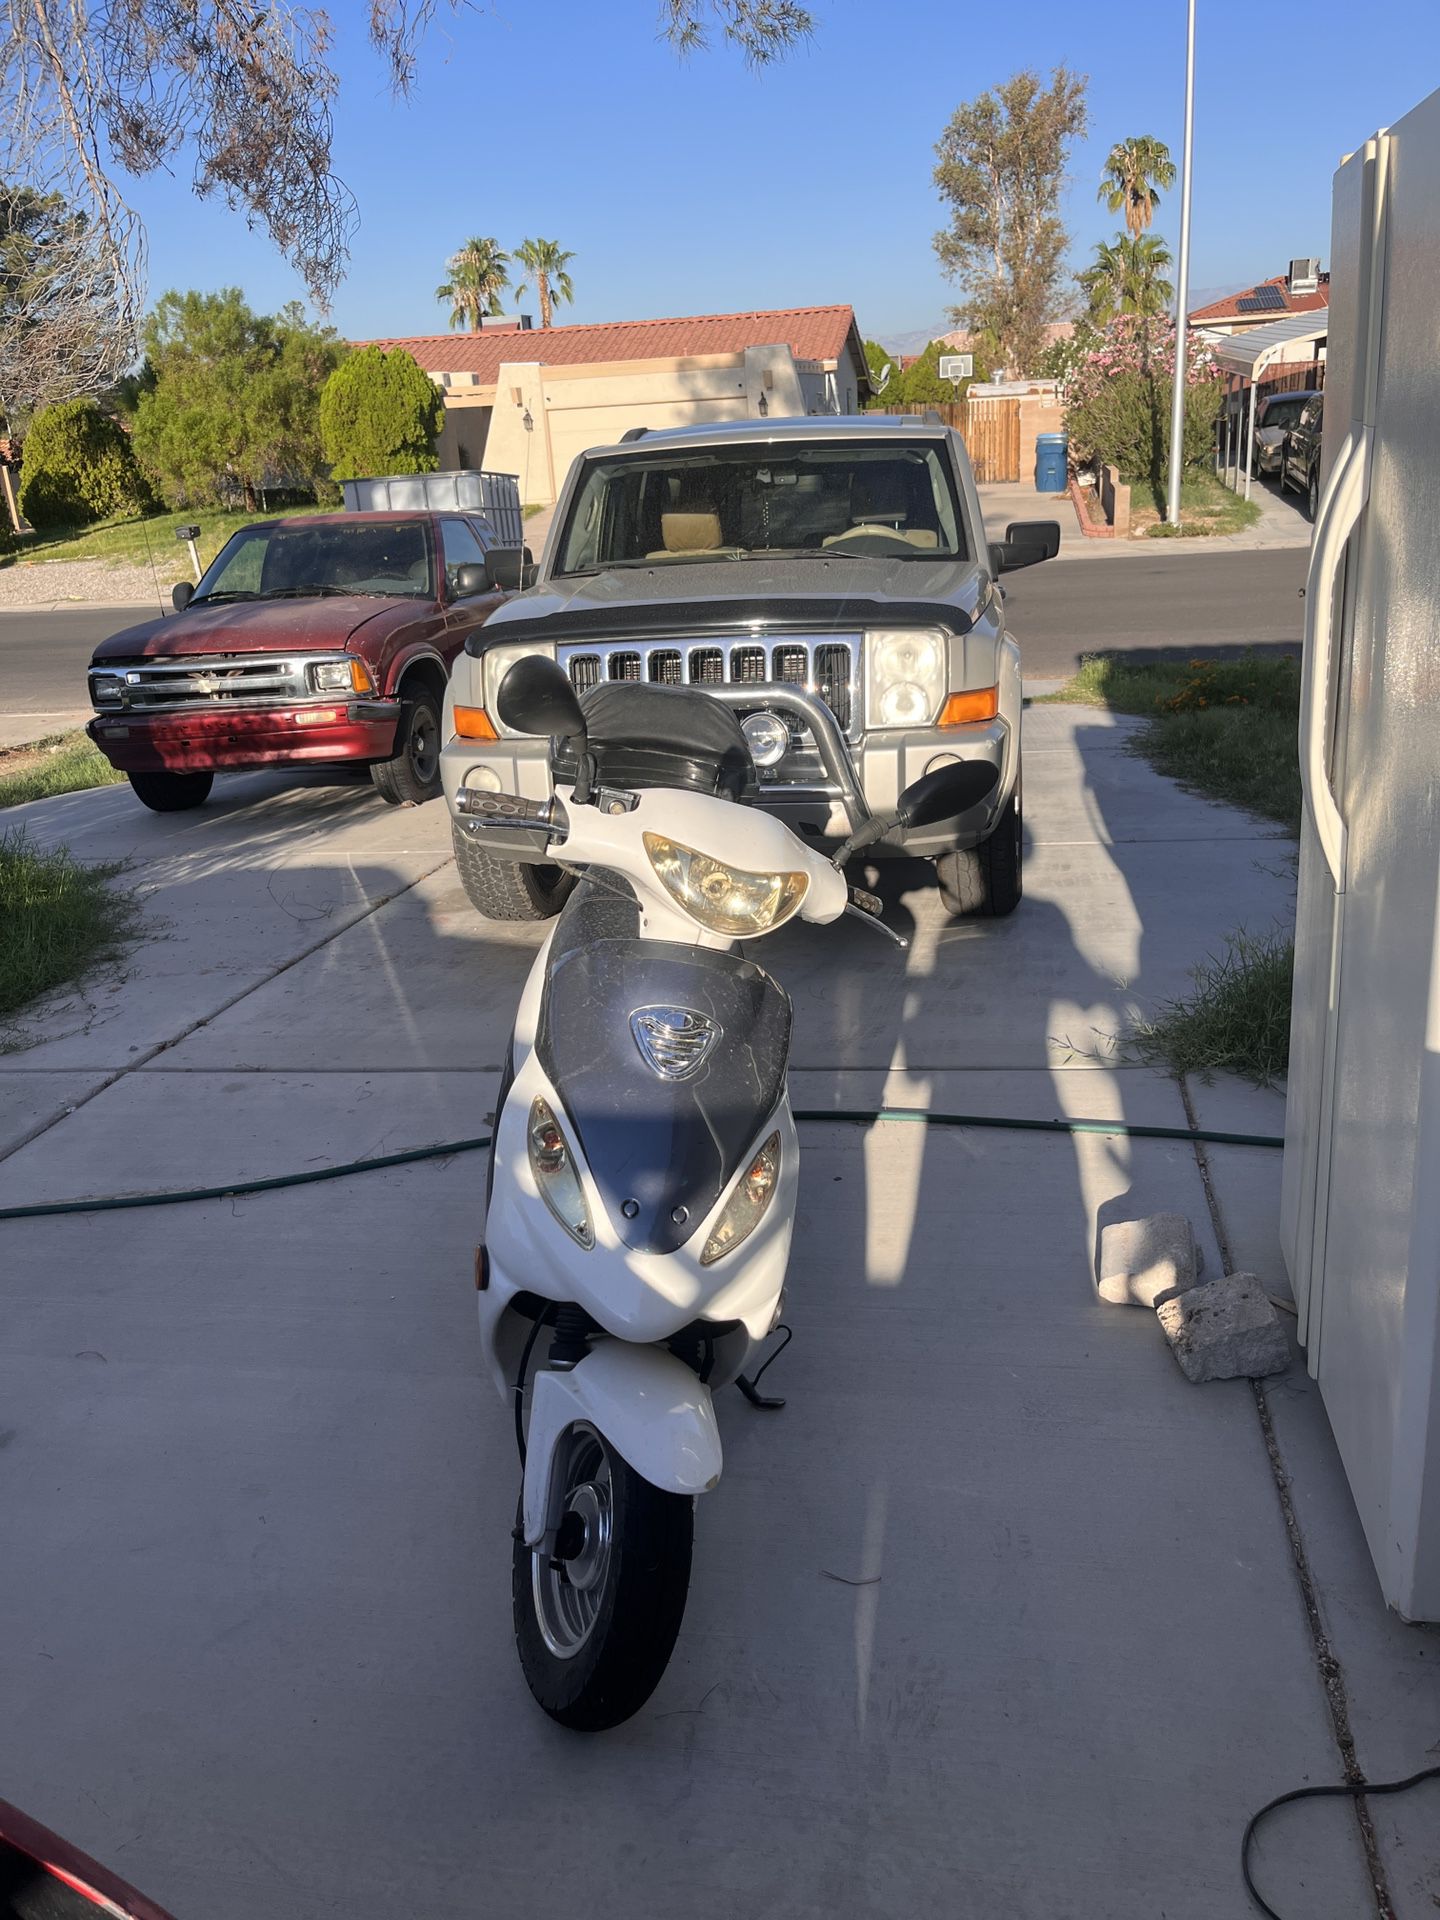 Moped For Sale 